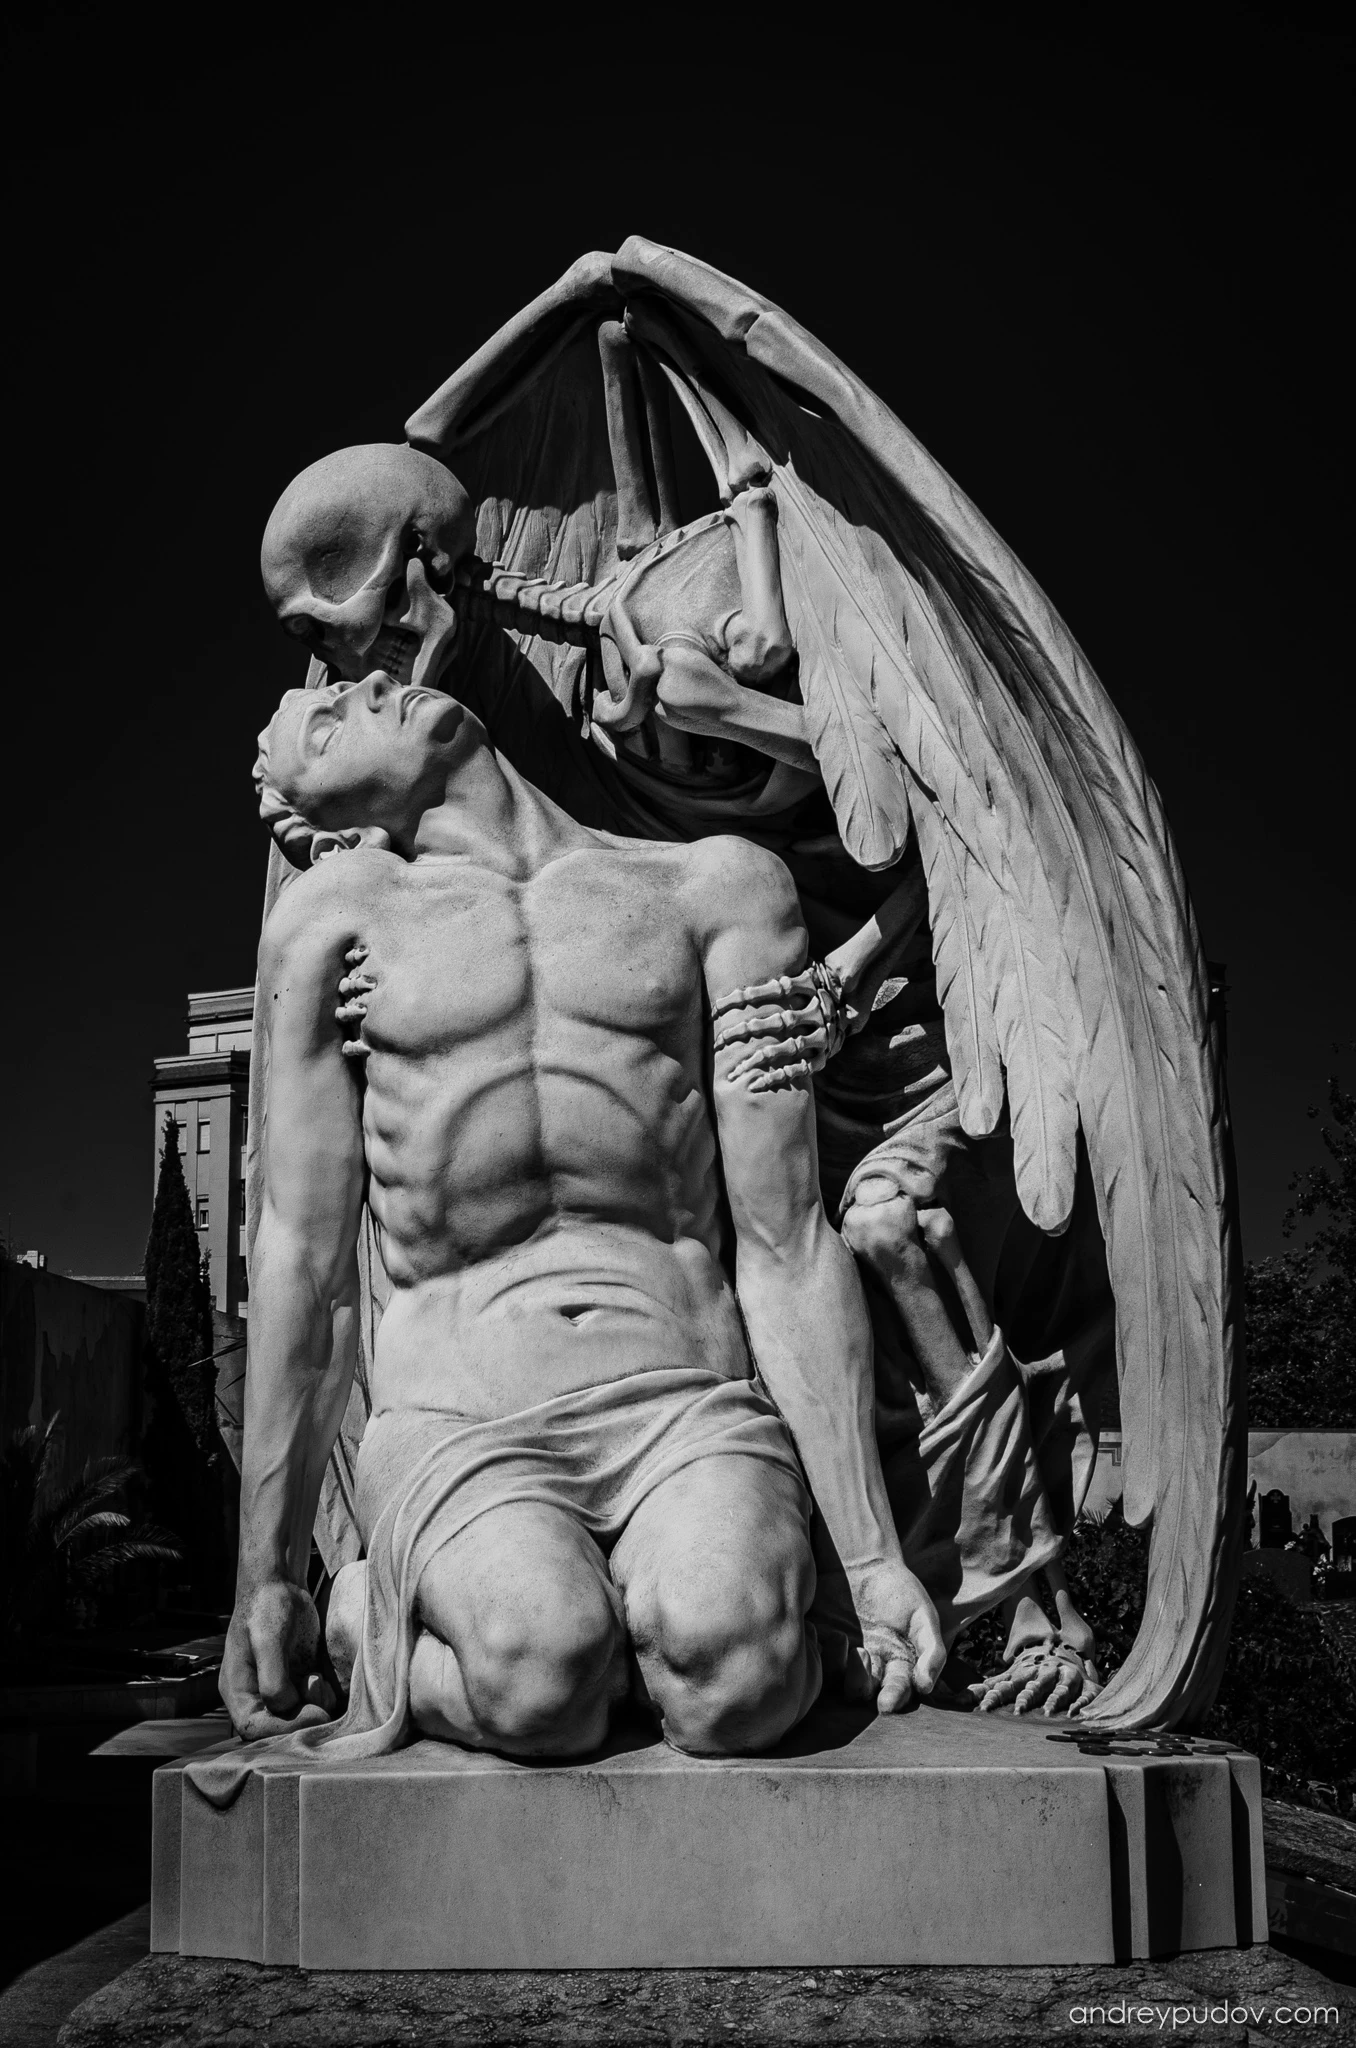 Favorite Photographs - The Kiss of Death

The Kiss of Death is a marble sculpture, found in Poblenou Cemetery. The sculpture is thought to have been created by Jaume Barba, although others have claimed that its idea was conceived by Joan Fontbernat. The sculpture depicts death, in the form of a winged skeleton, planting a kiss on the forehead of a young man. The sculpture elicits varying responses from viewers concerning the depiction of the young man ranging from ecstasy to resignation.

"His young heart is thus extinguished. The blood in his veins grows cold. And all strength has gone. Faith has been extolled by his fall into the arms of death. Amen."